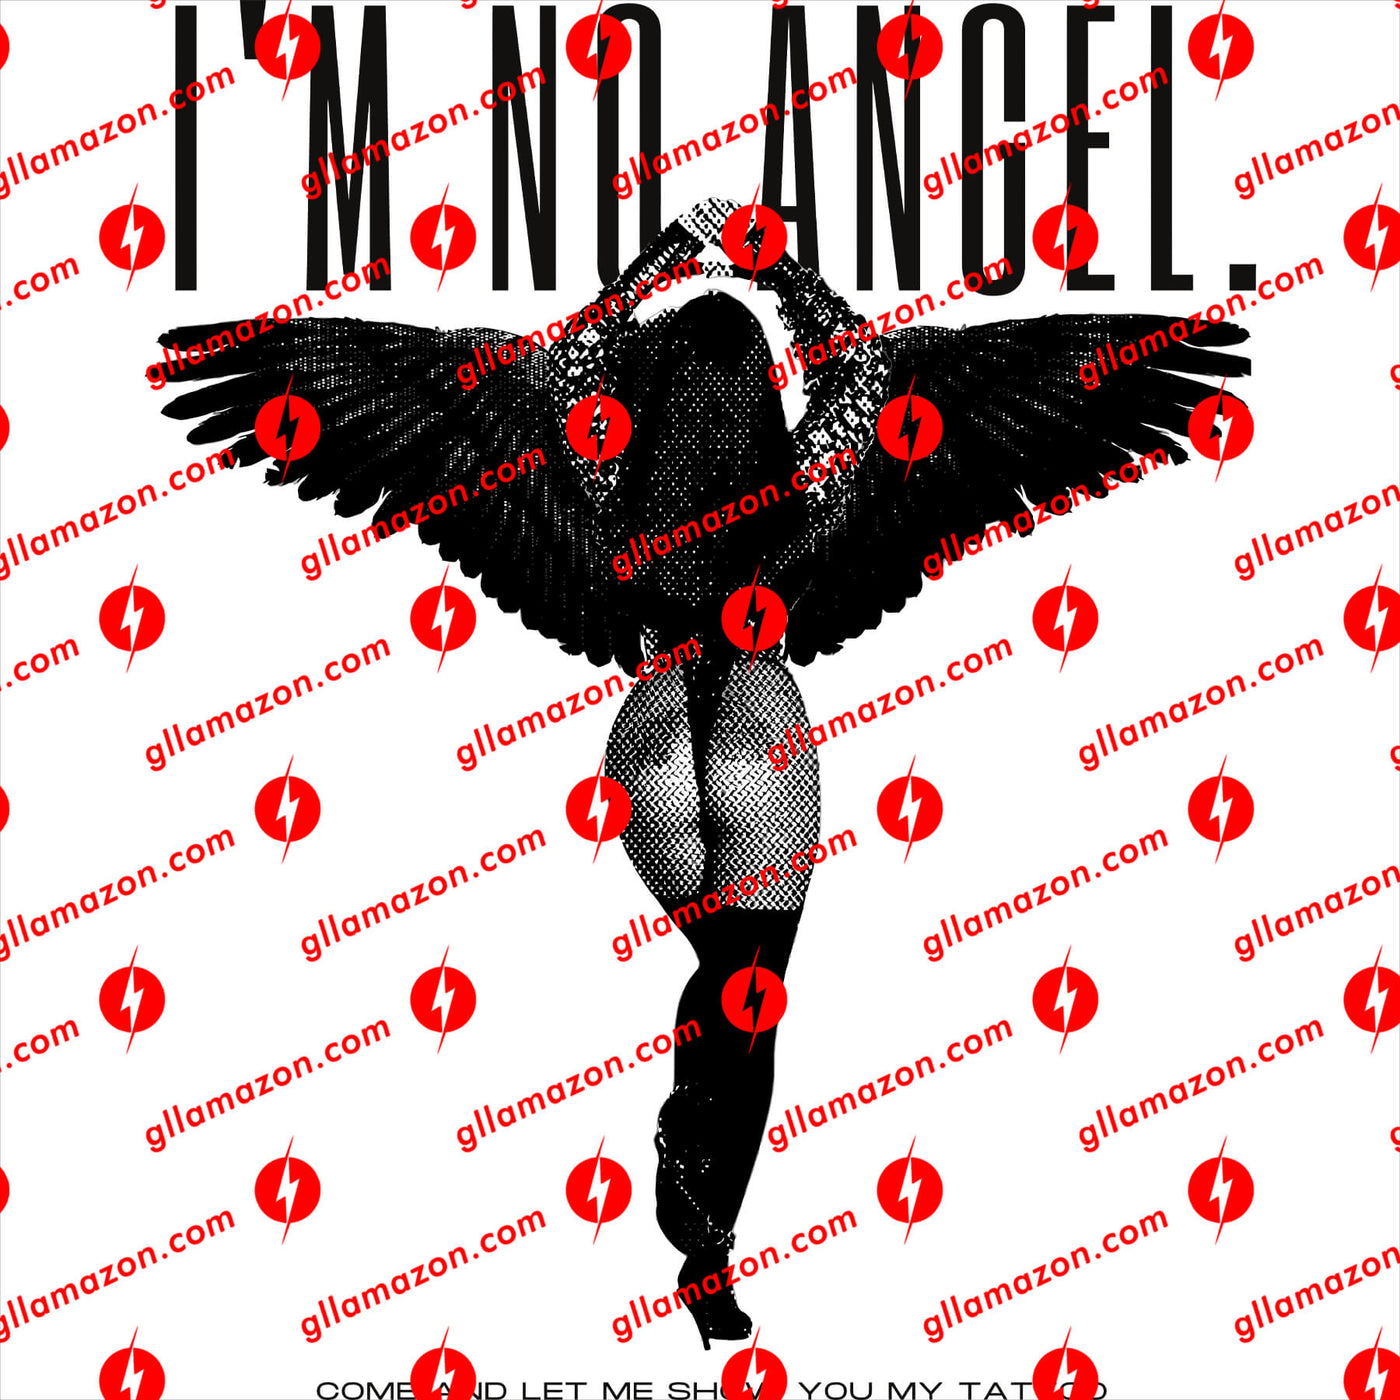 Promotional design preview for the "I'm No Angel" T-shirt, inspired by Cher and Gregg Allman, created by Gllamazon.